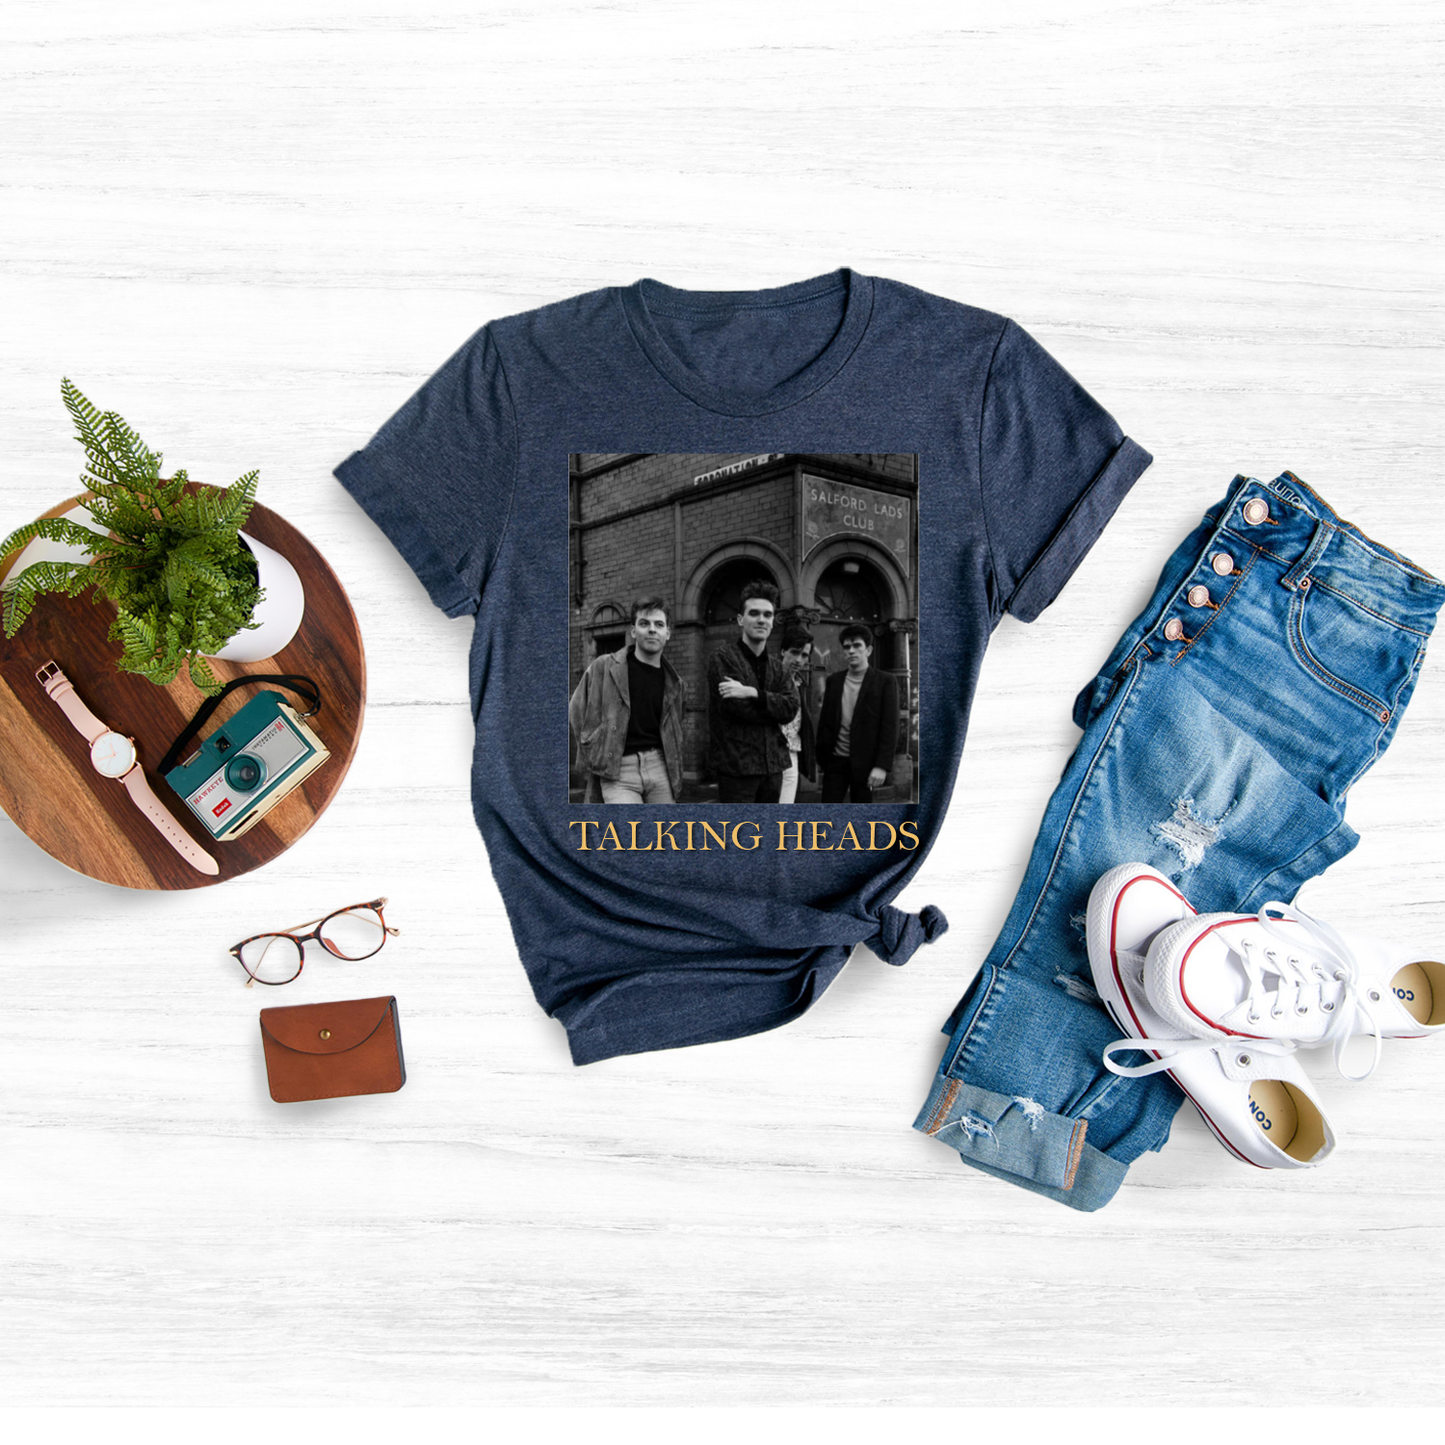 Pay homage to the iconic British indie rock band The Smiths with our vintage-inspired The Smiths Unisex T-Shirt, the perfect way to show off your love for their timeless music and unique style.